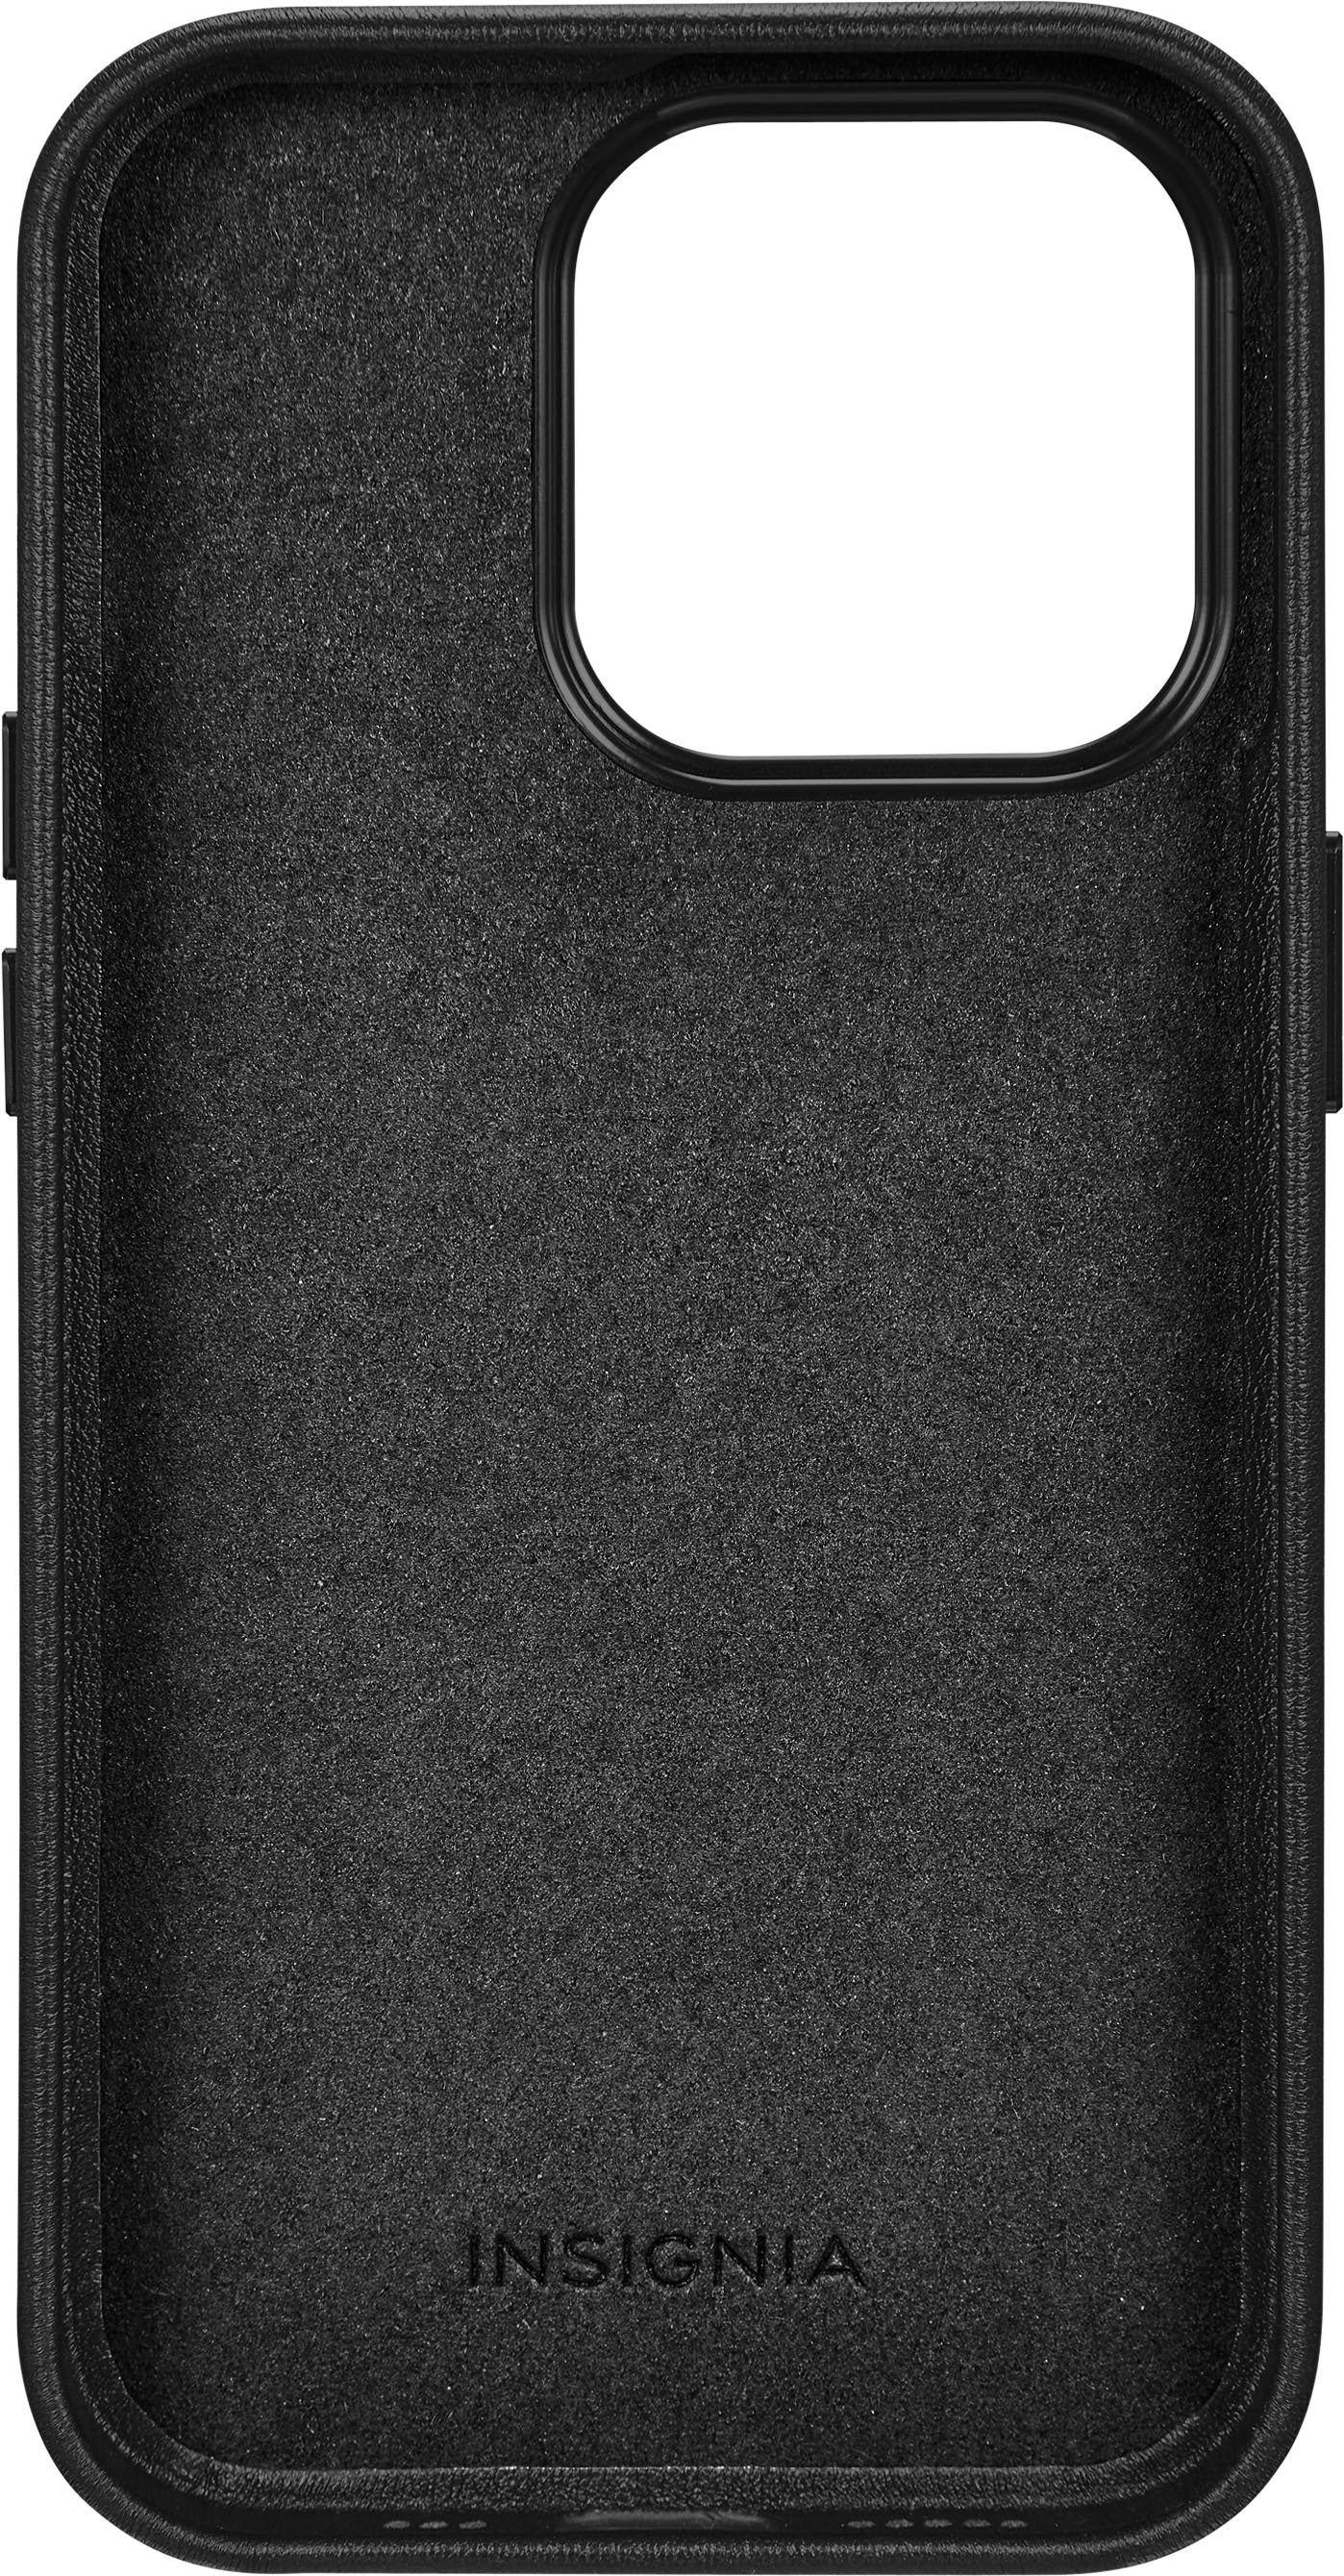 Insignia™ Leather Wallet Case for iPhone 14 Pro Black NS-14PLTHRB ...